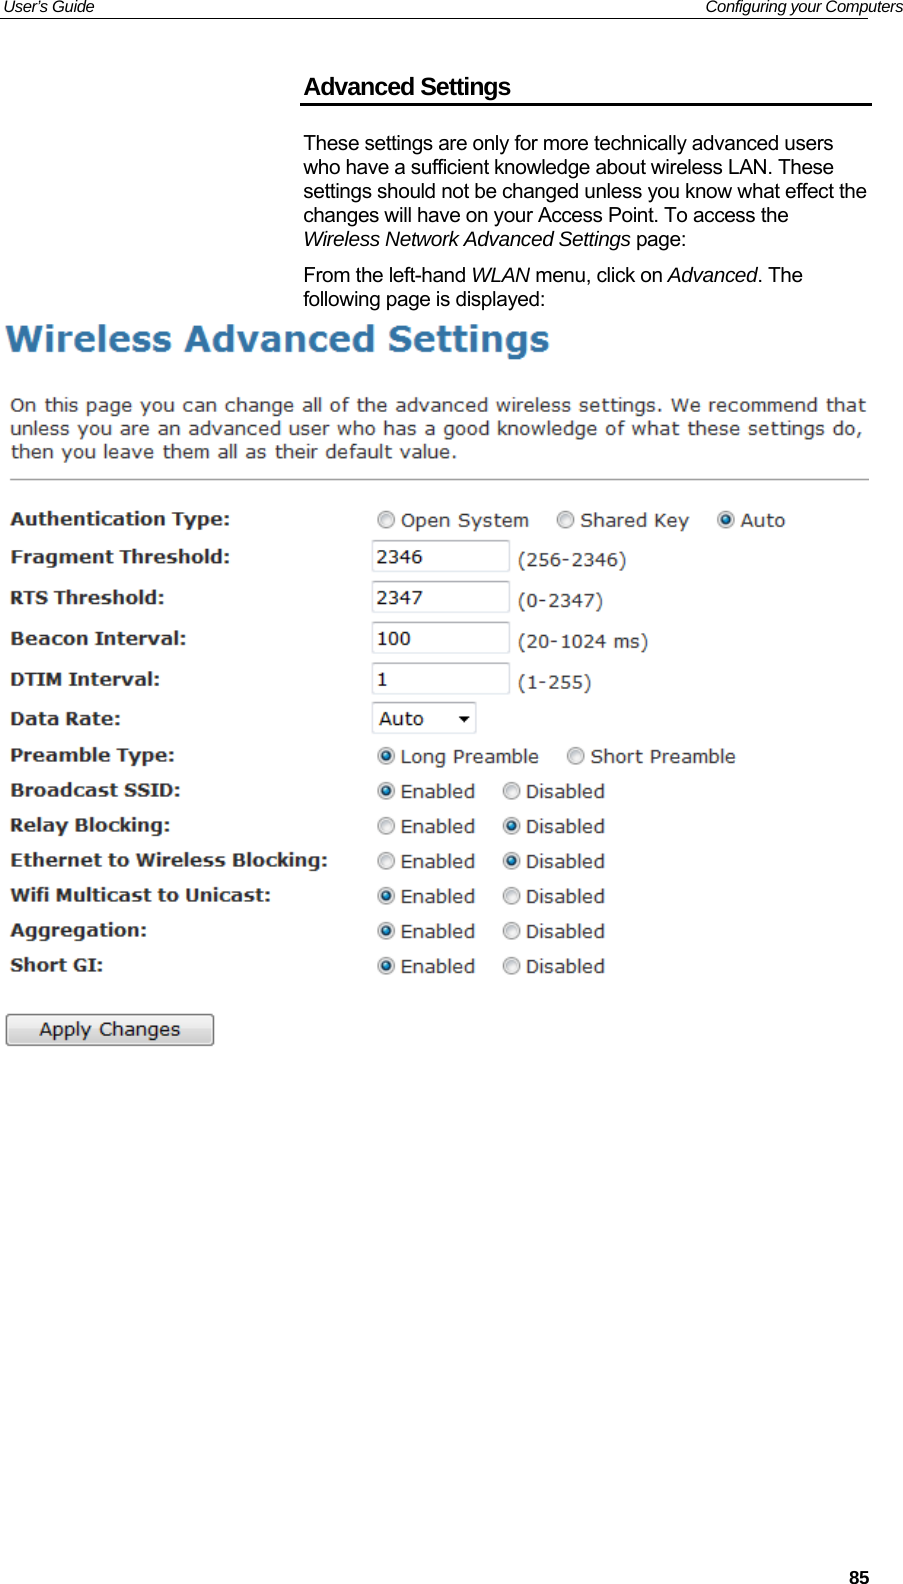 User’s Guide   Configuring your Computers Advanced Settings These settings are only for more technically advanced users who have a sufficient knowledge about wireless LAN. These settings should not be changed unless you know what effect the changes will have on your Access Point. To access the Wireless Network Advanced Settings page: From the left-hand WLAN menu, click on Advanced. The following page is displayed:                85